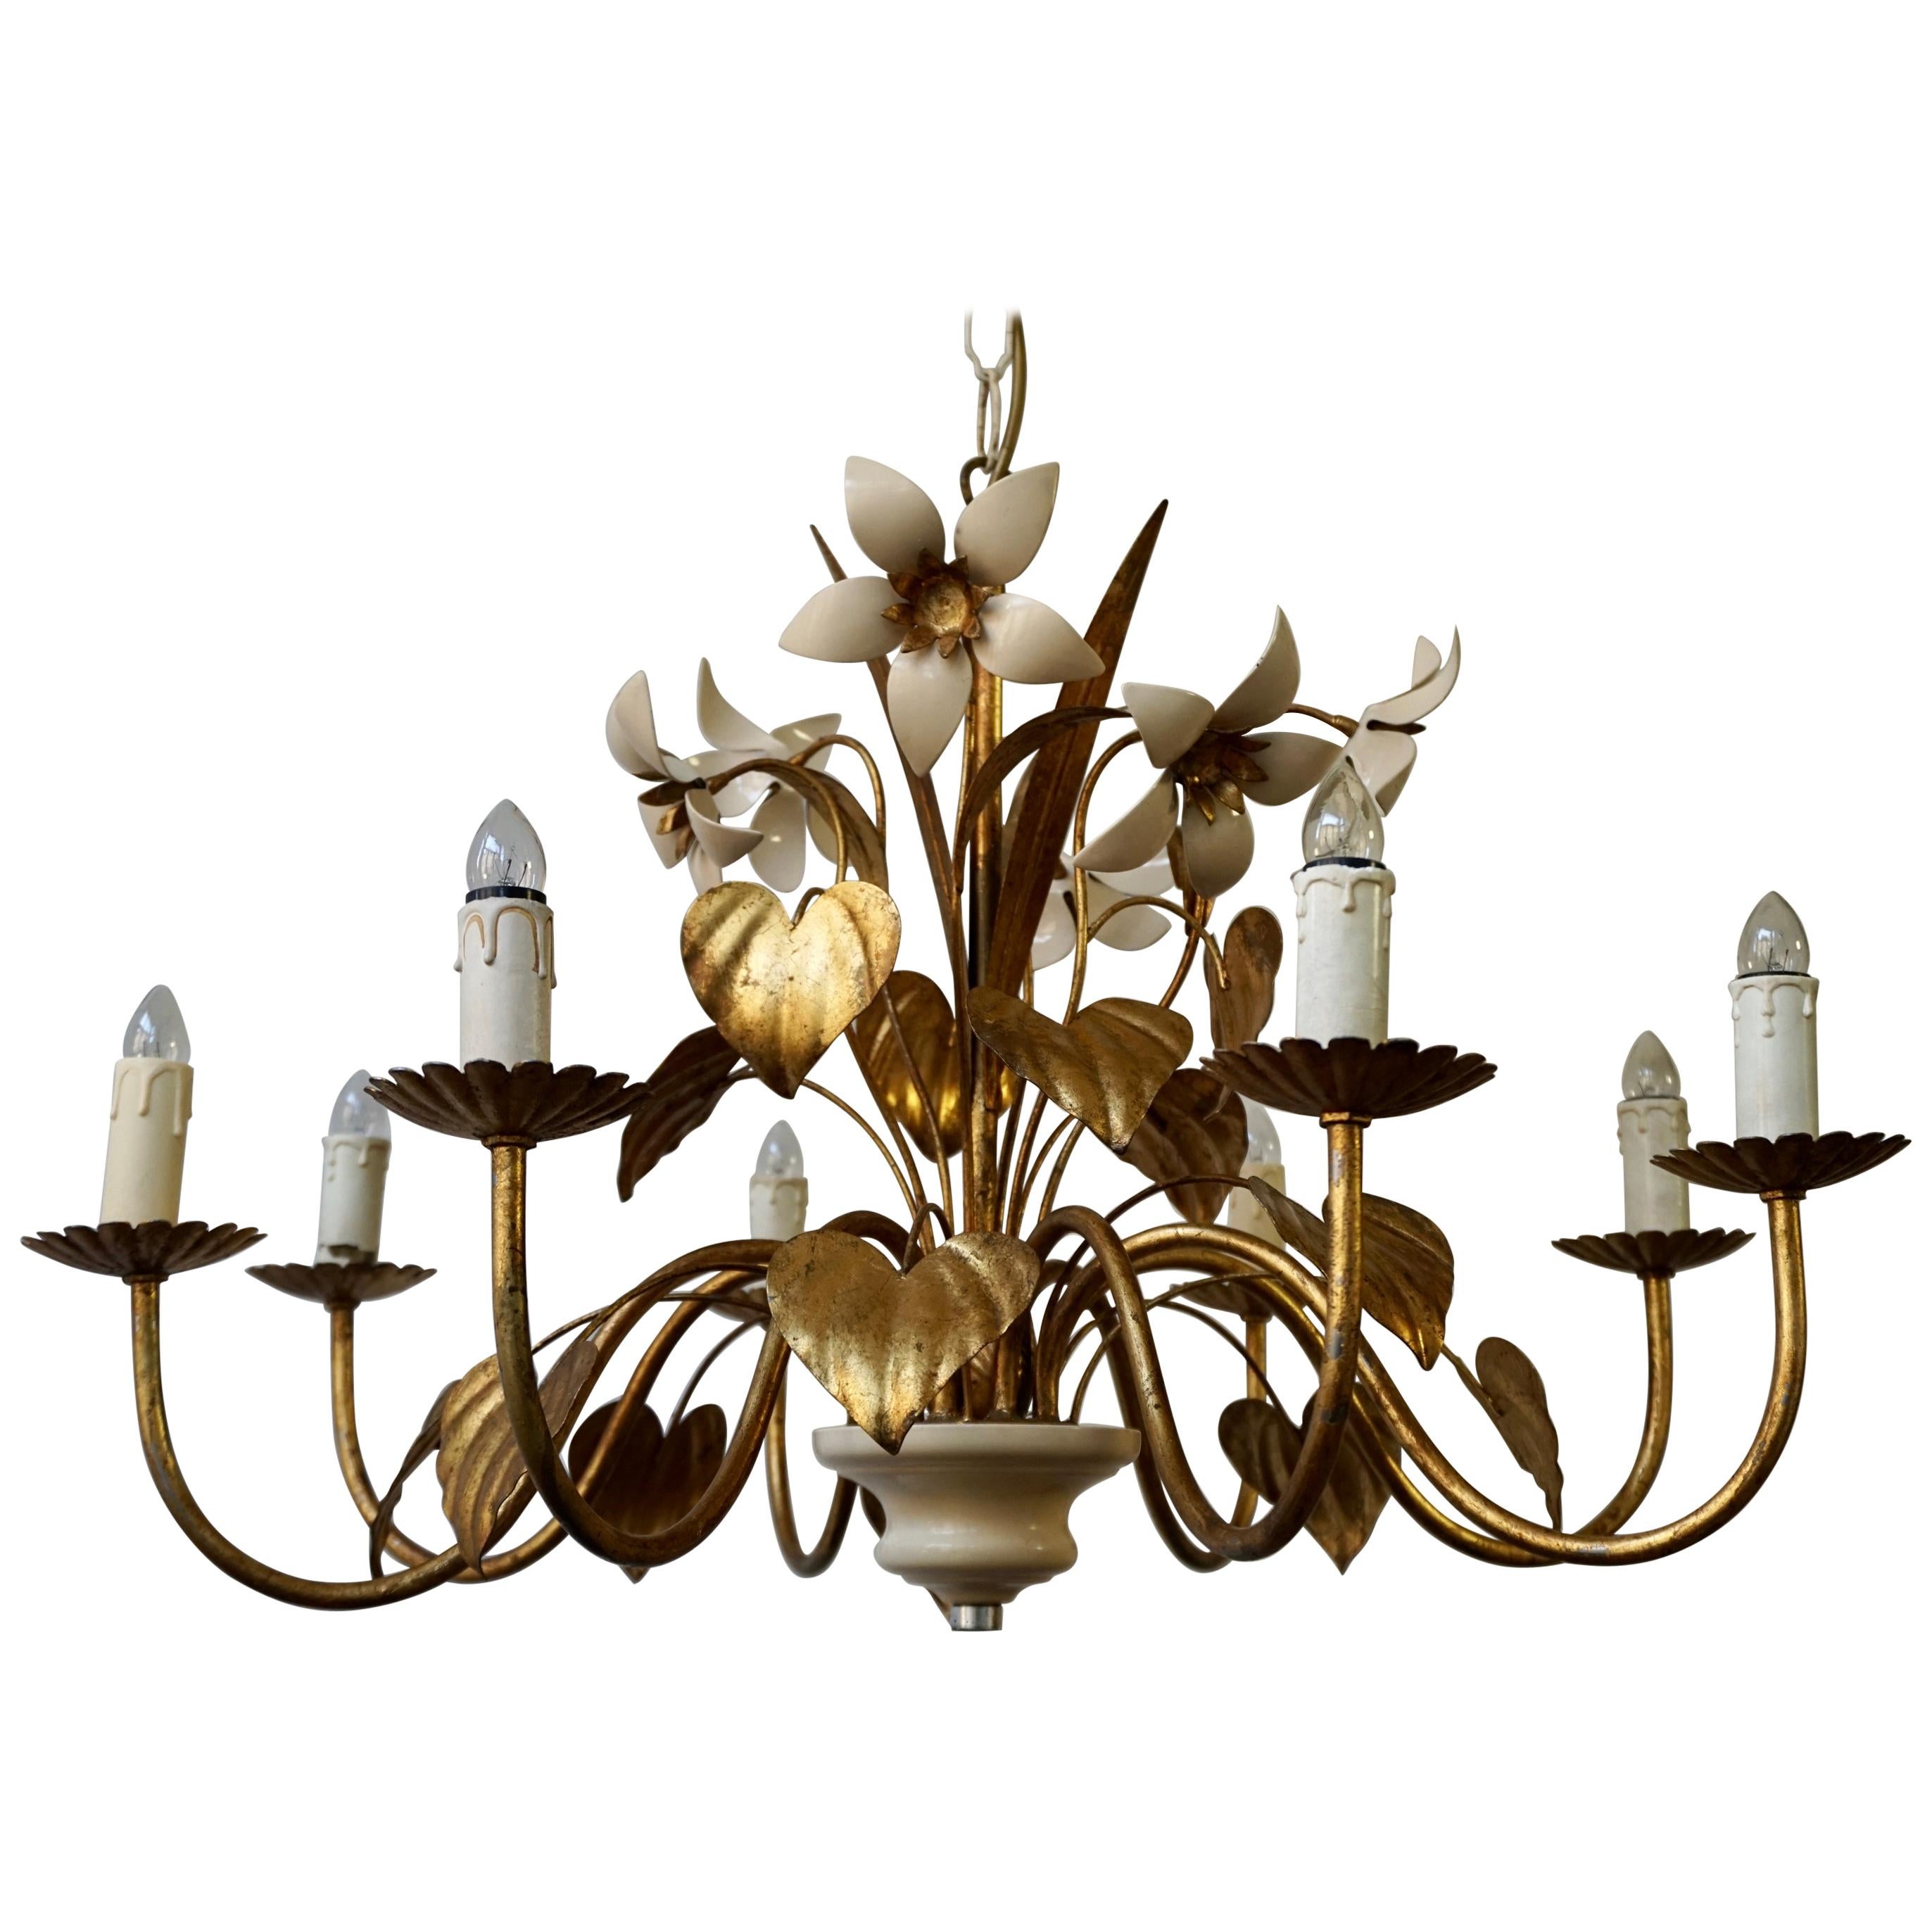 Chandelier with Golden Leaves and White Flowers